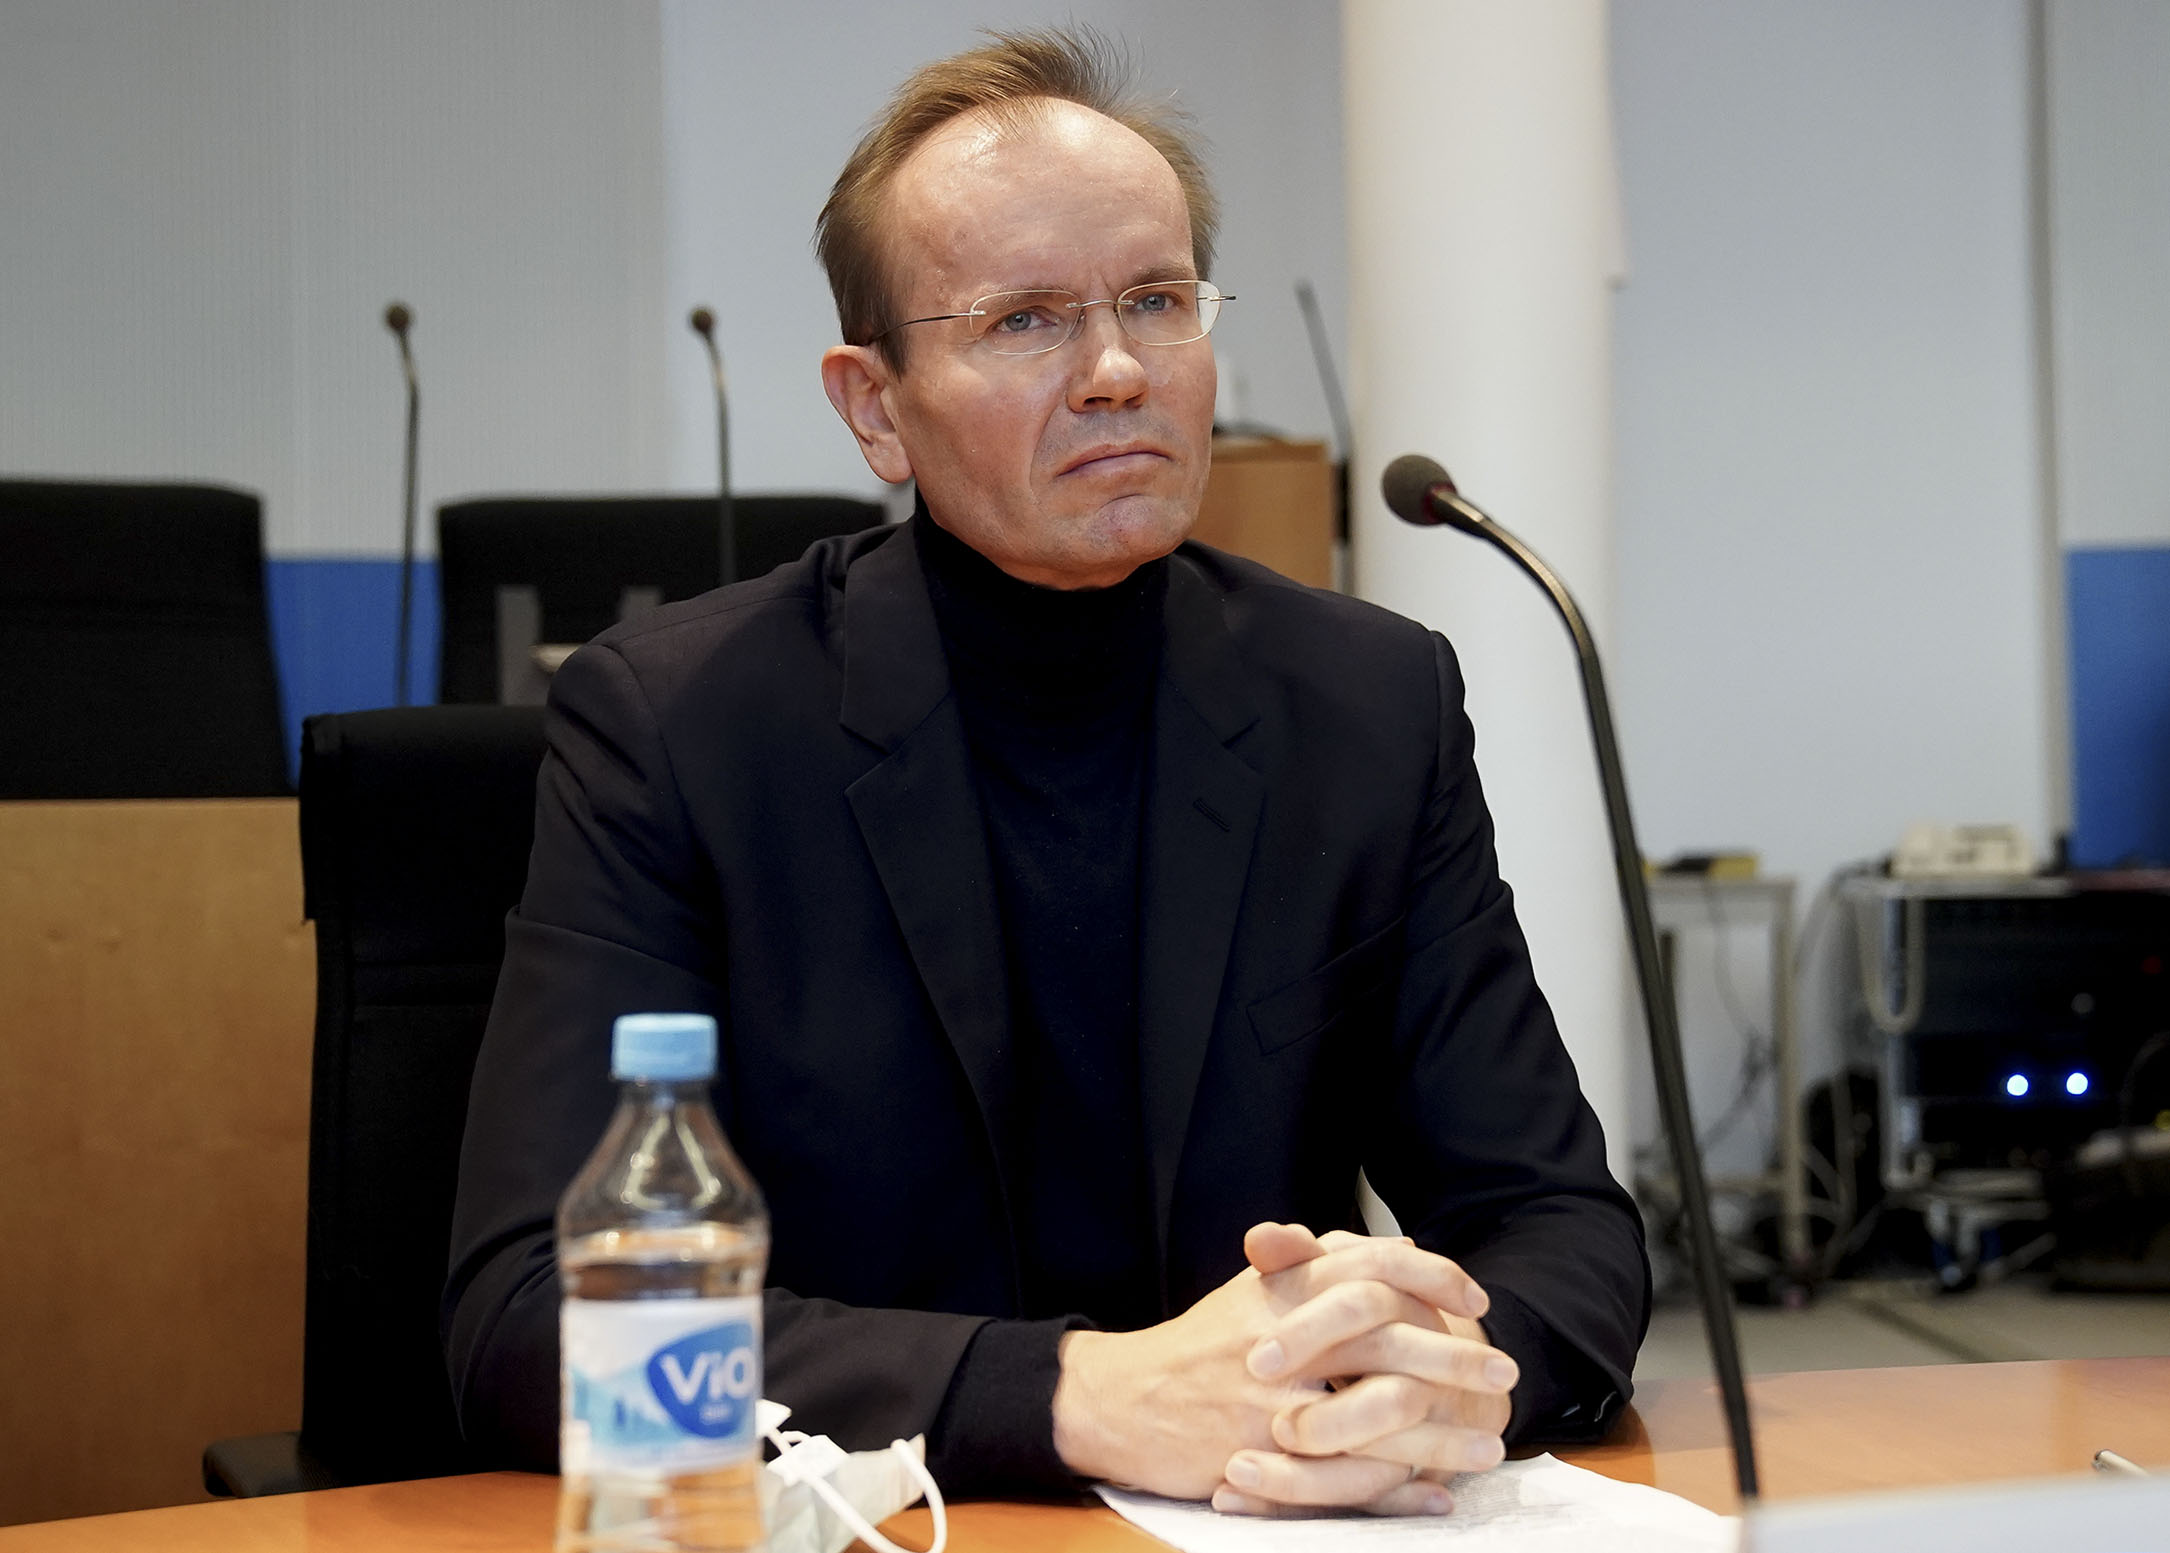 Former Wirecard CEO Markus Braun prepares to testify at the Bundestag commission